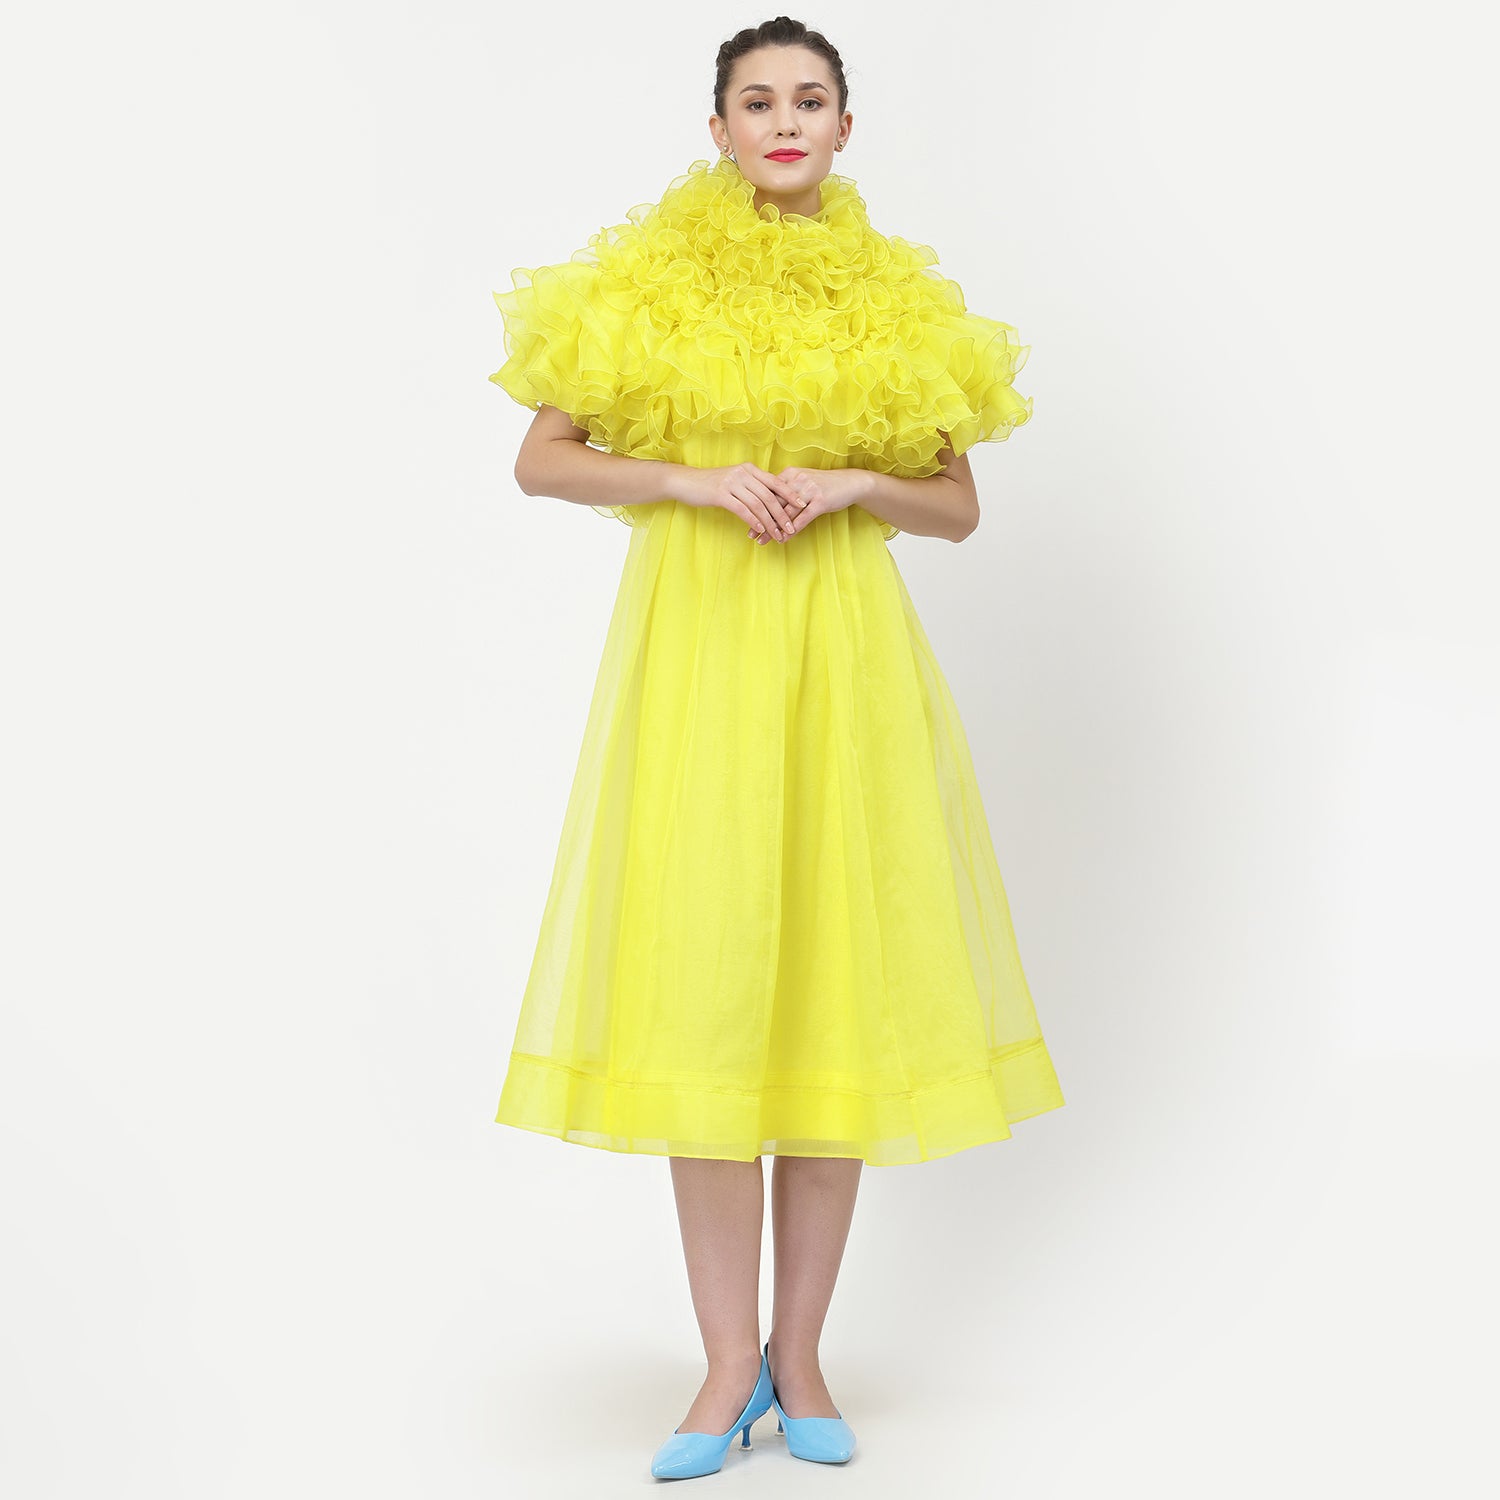 Neon Yellow Organza Dress With Frill Cape Collar